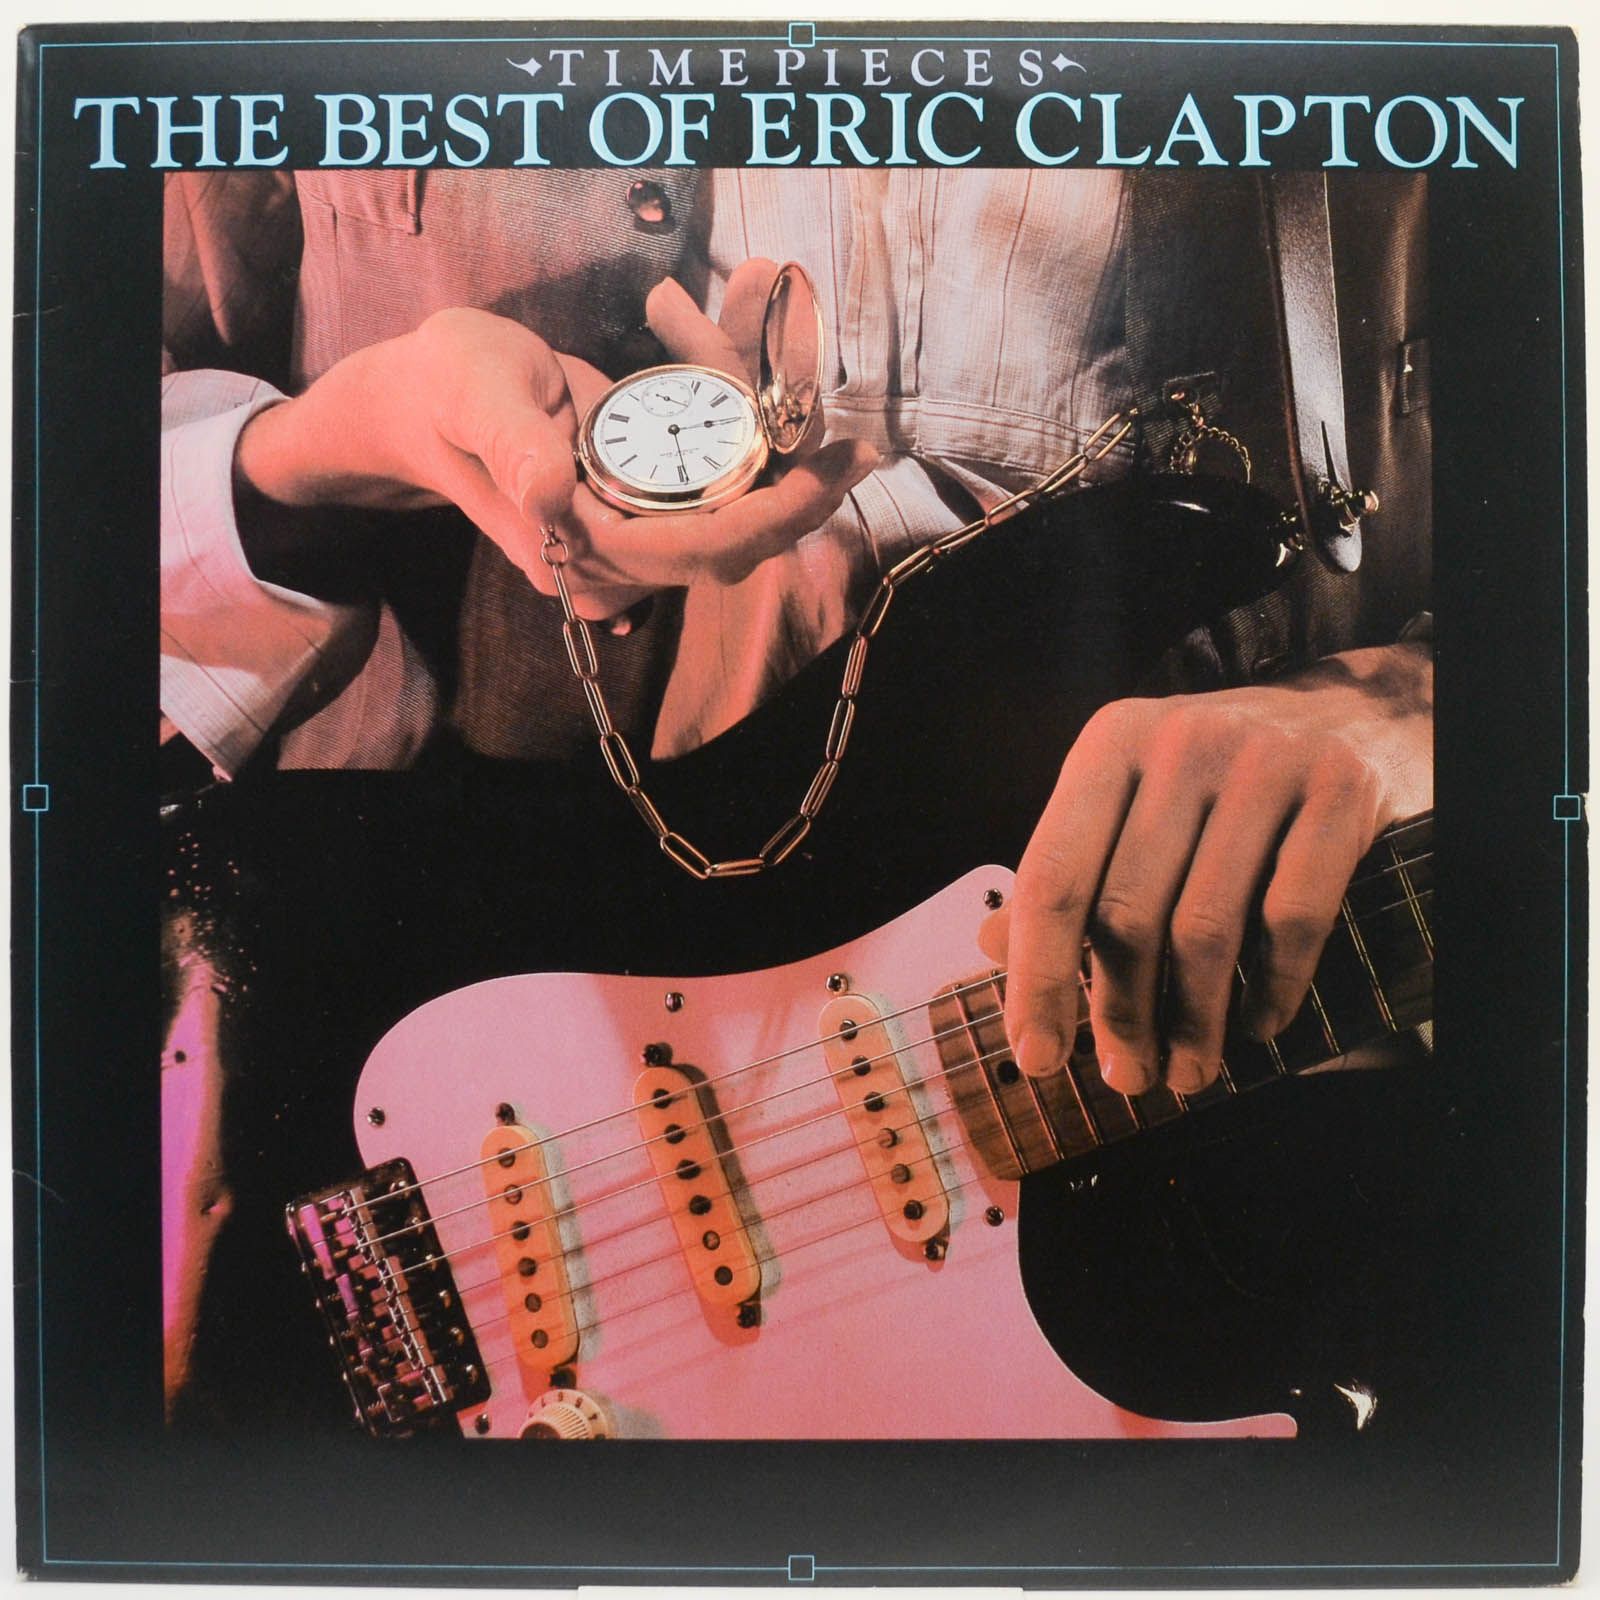 Eric Clapton — Time Pieces - The Best Of Eric Clapton (USA), 1984